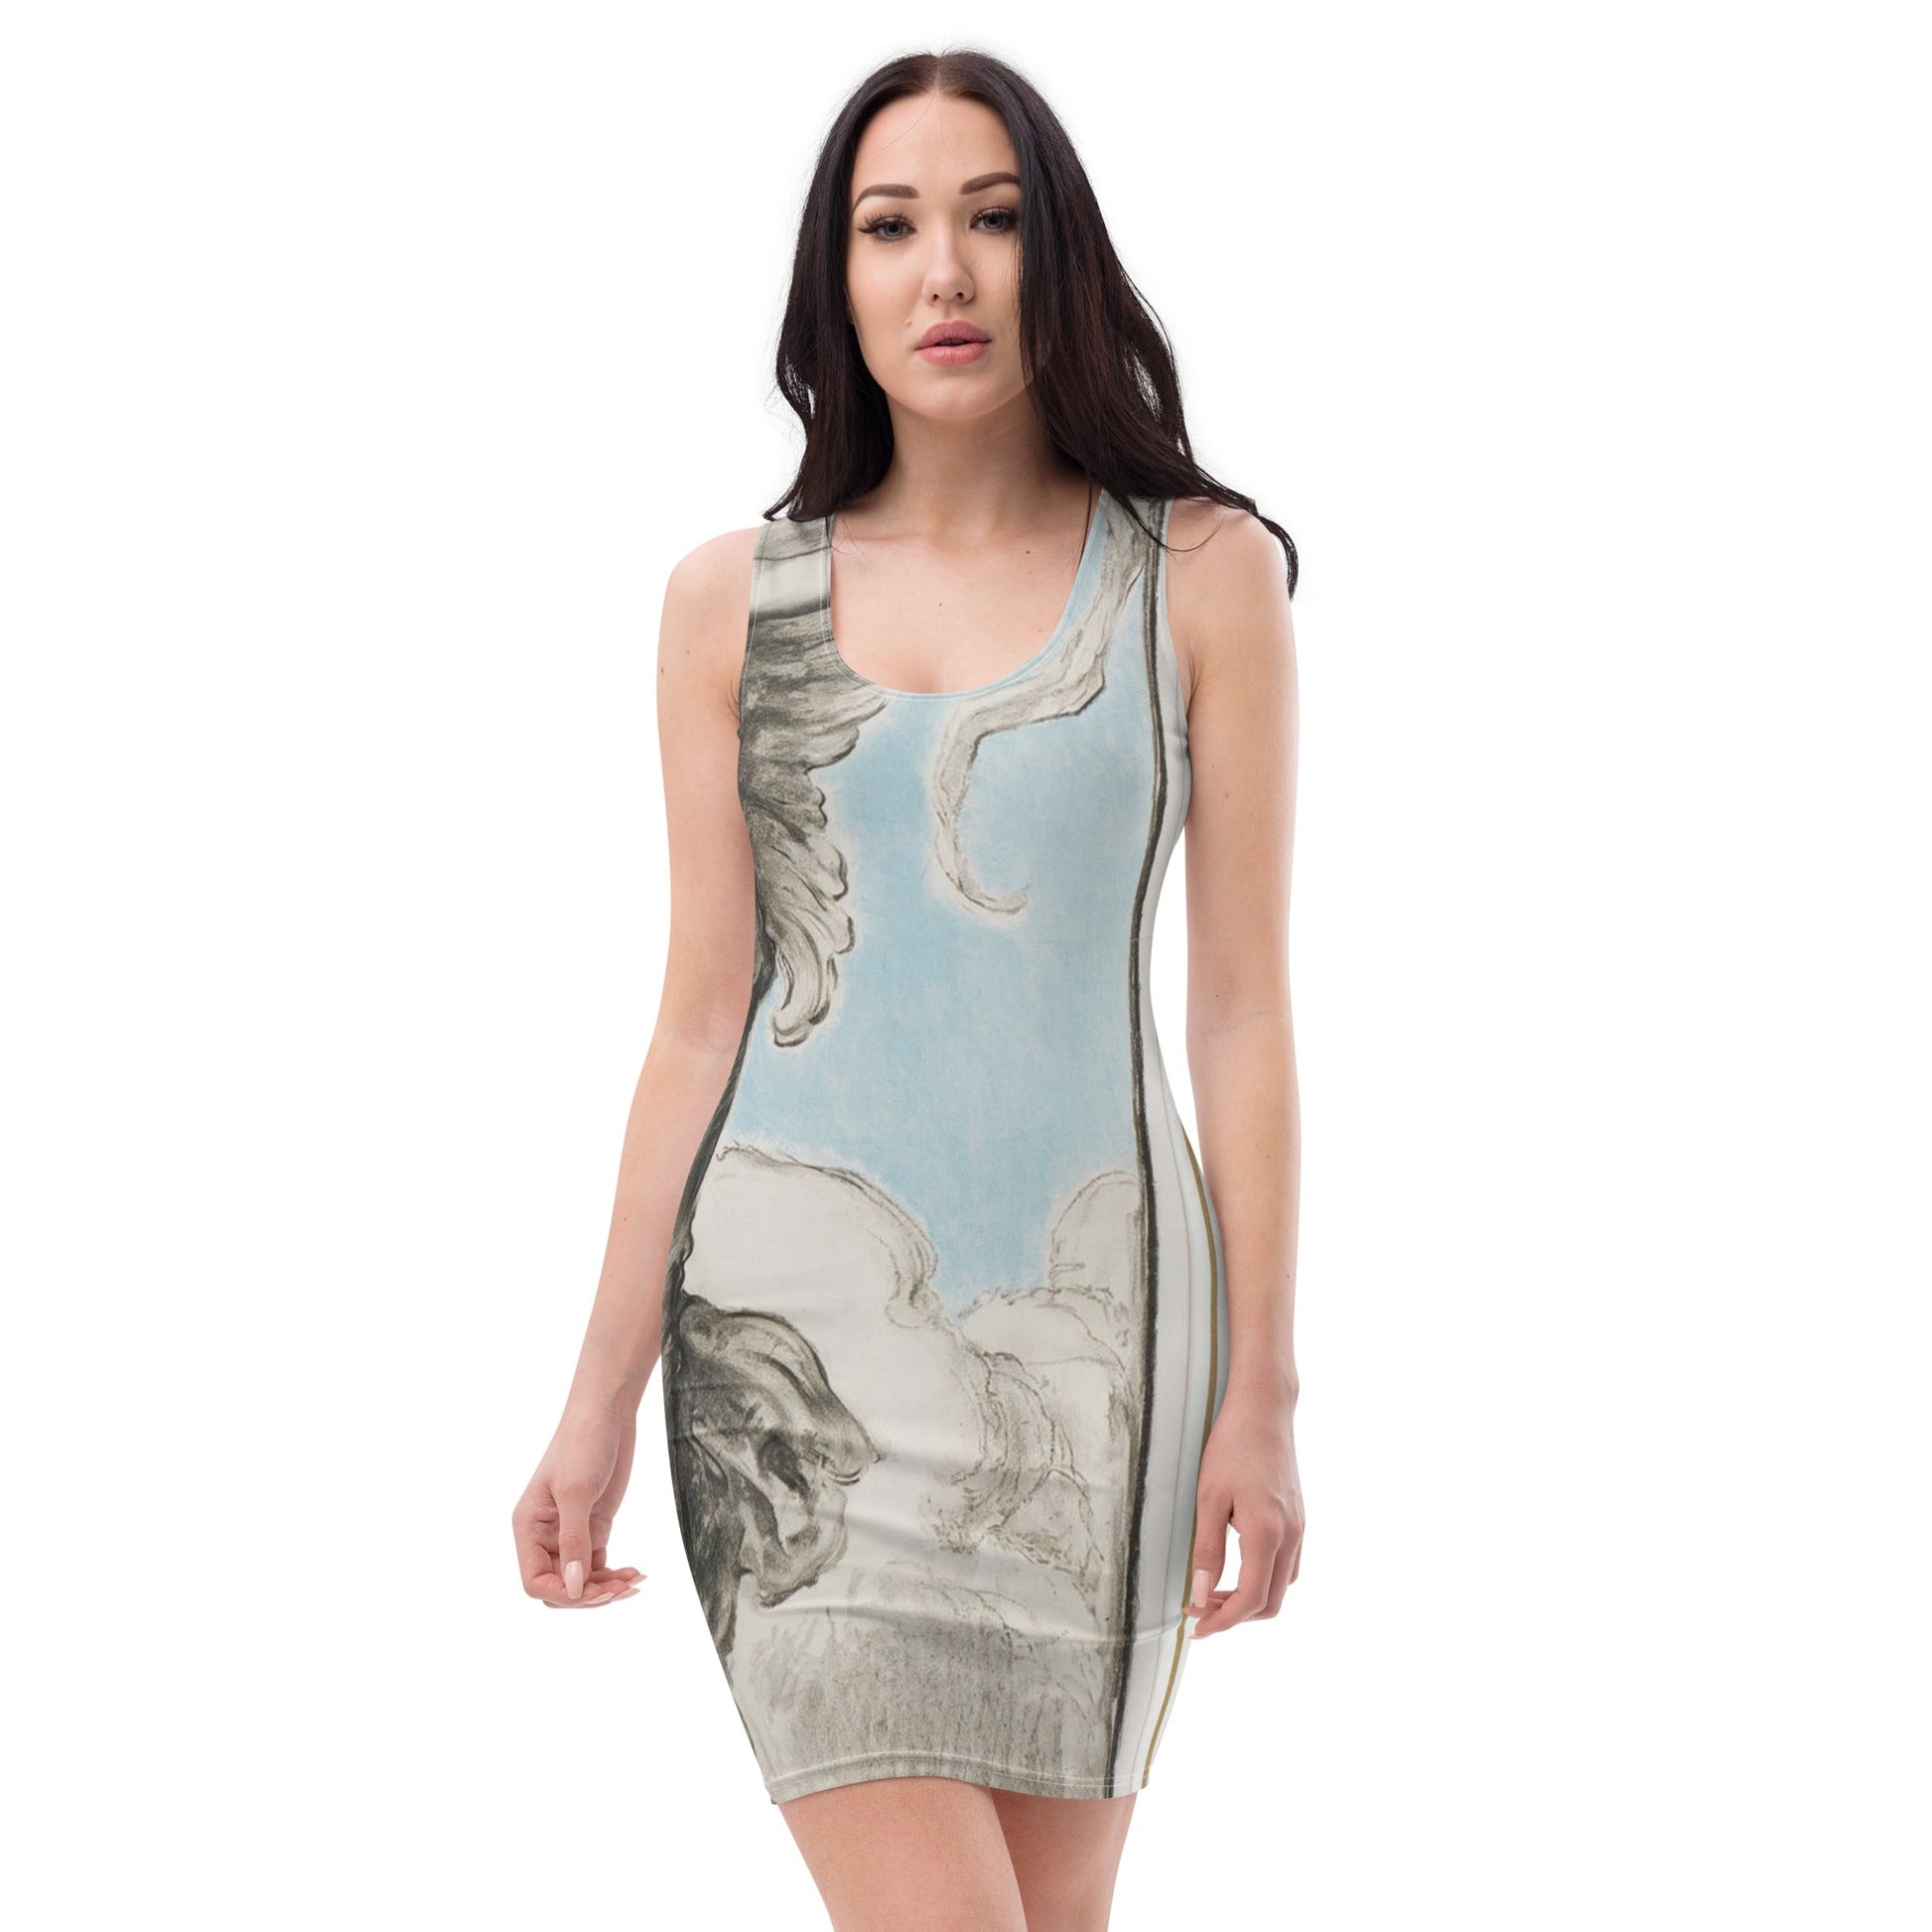 Artis - Bodycon dress - Souled Out World